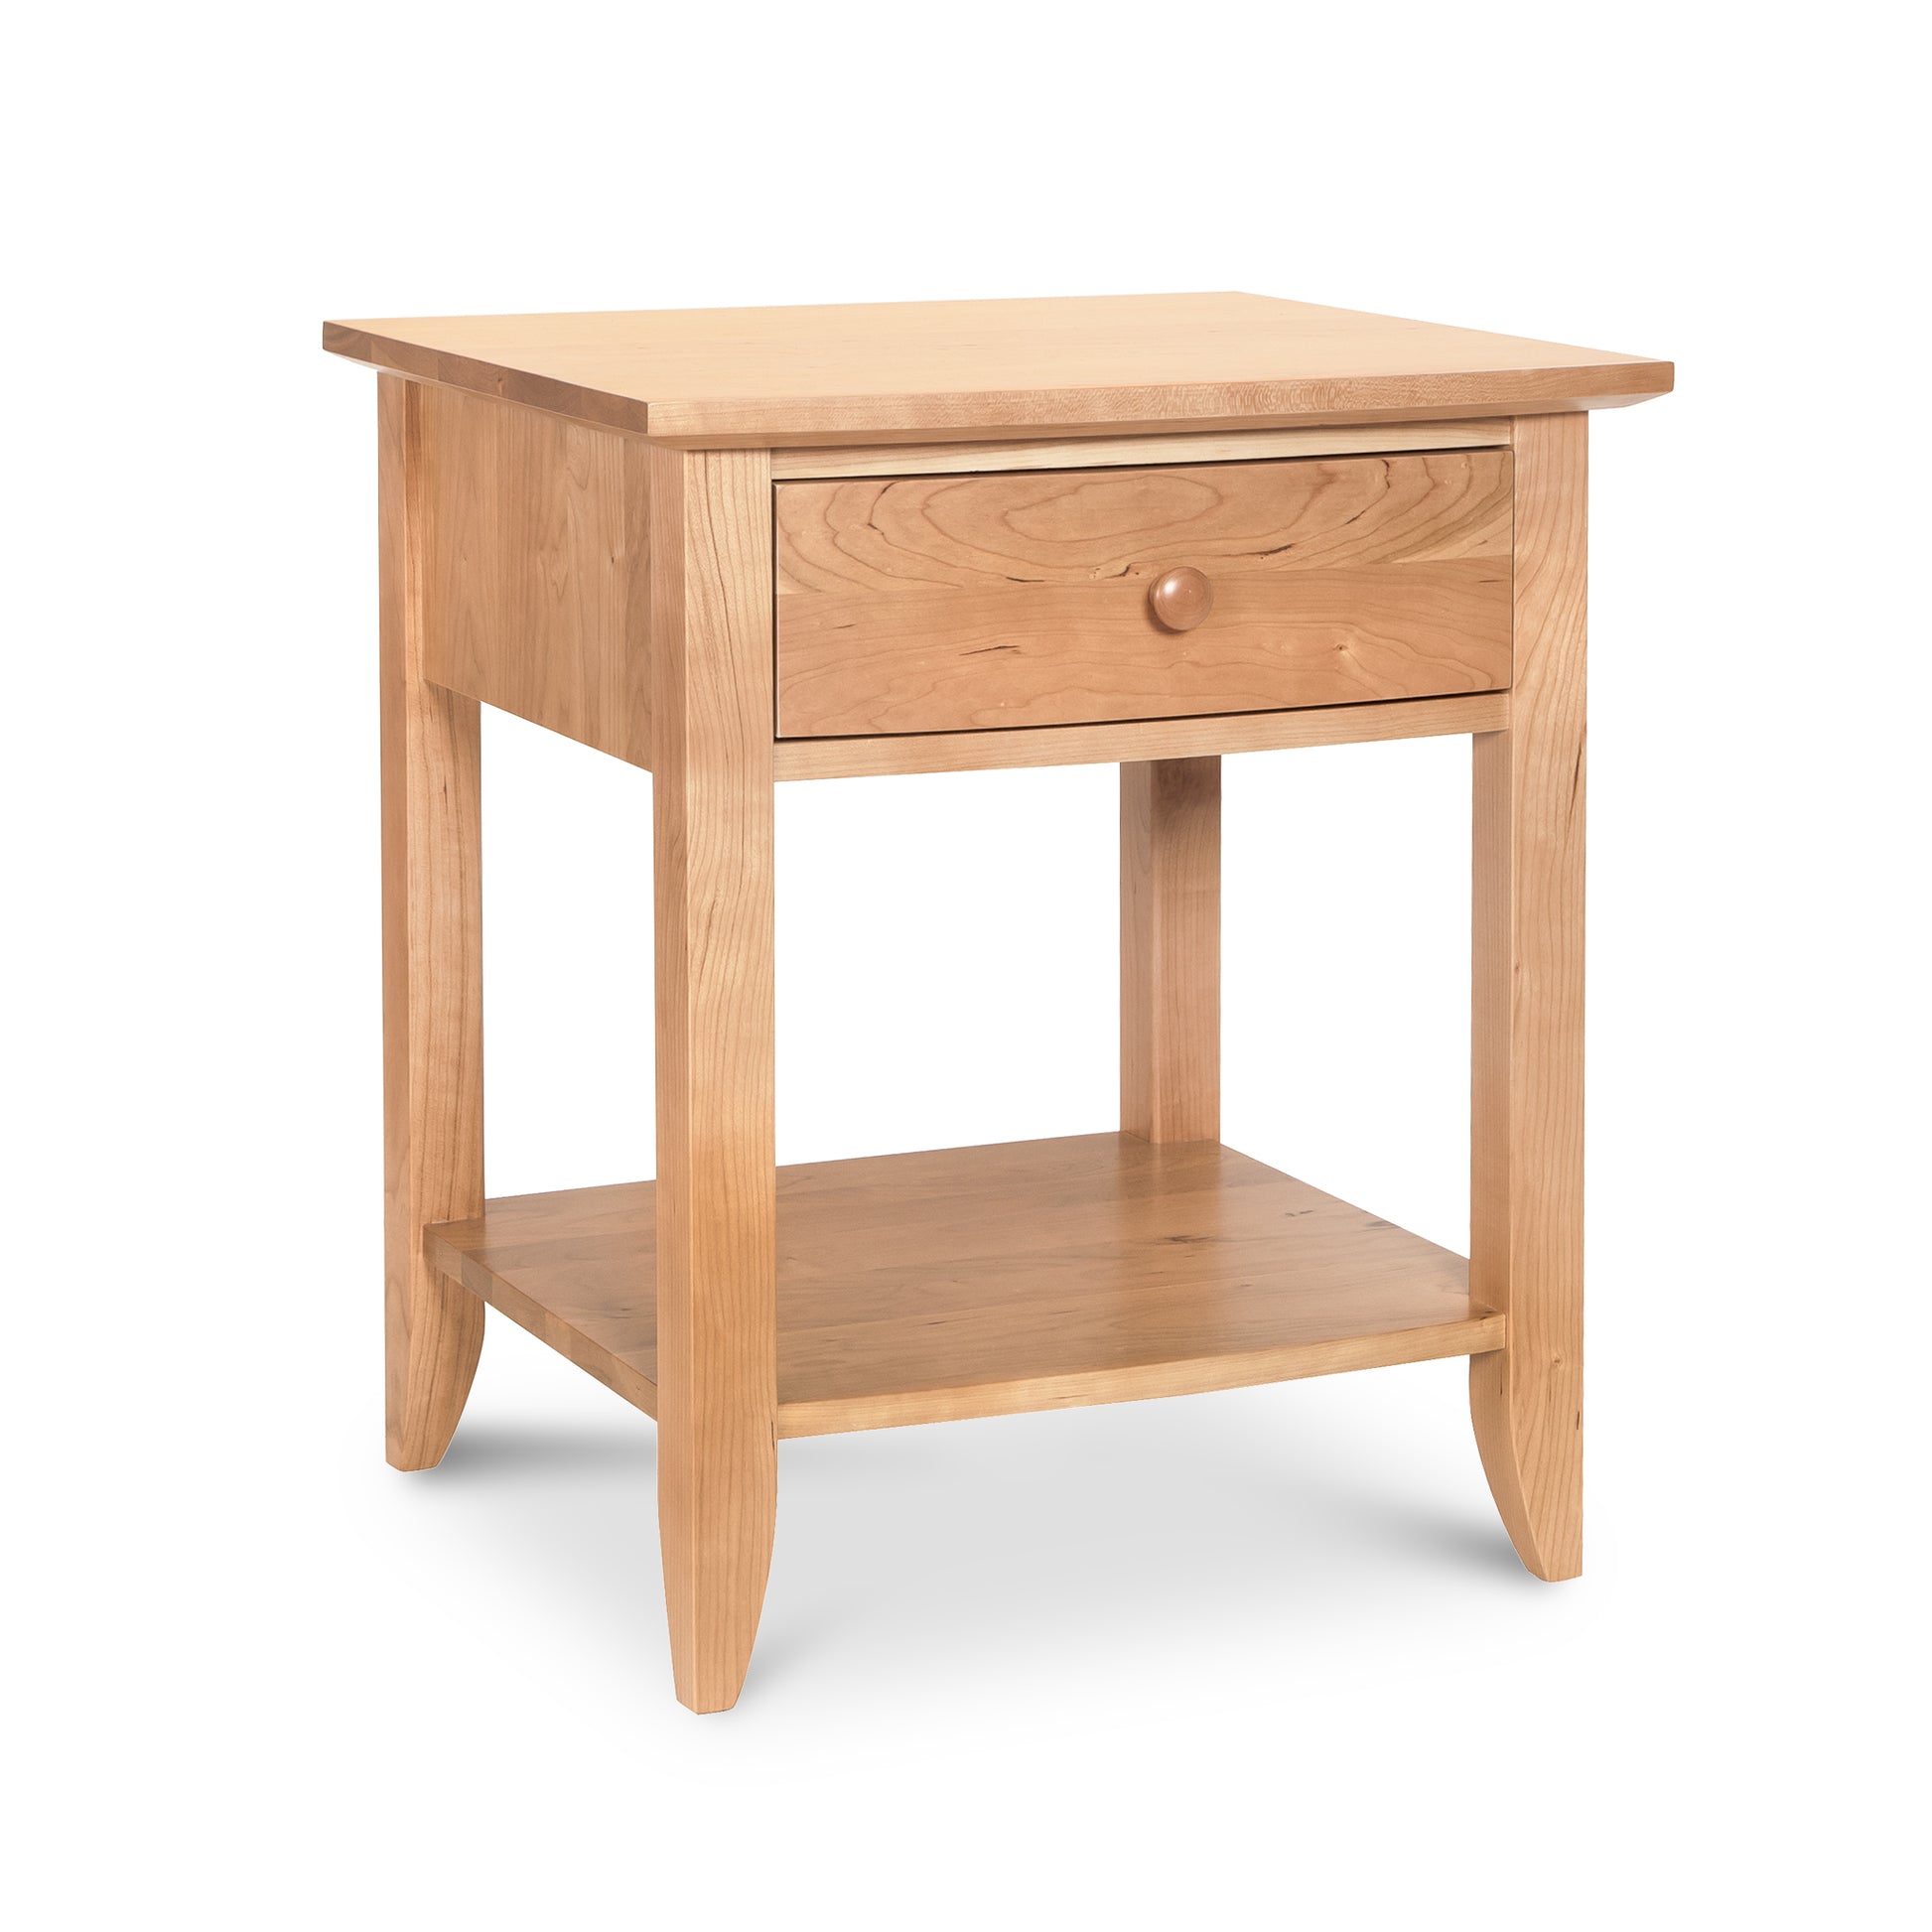 A Lyndon Furniture Bow Front 1-Drawer Open Shelf Nightstand with a drawer on top.